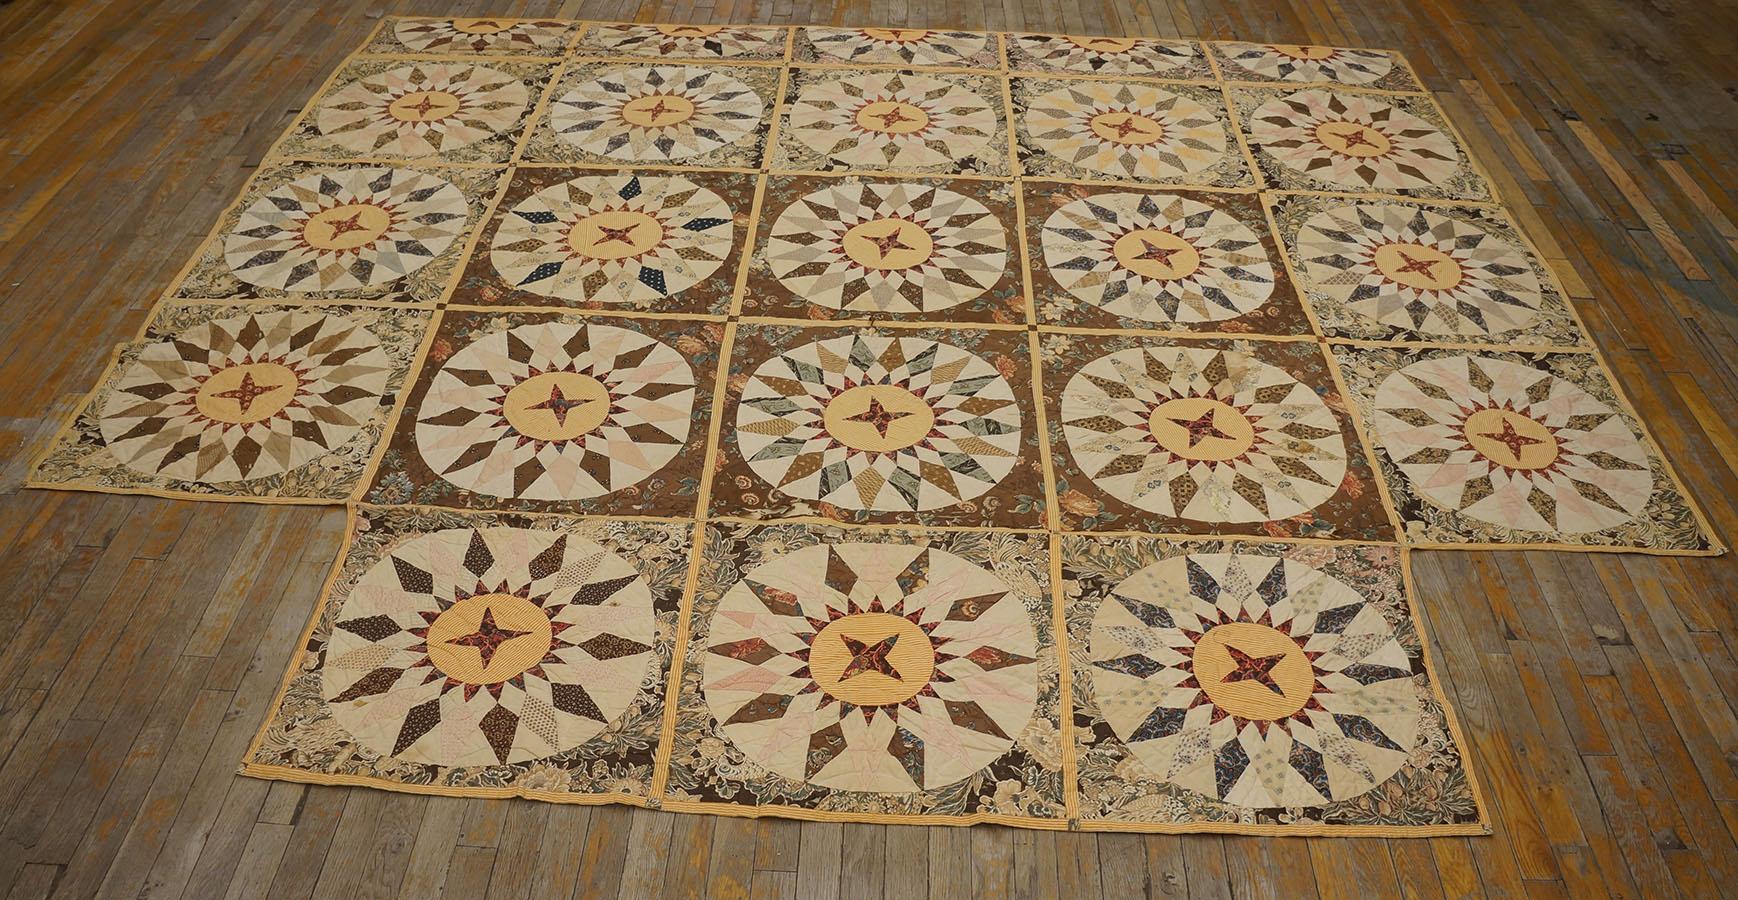 Folk Art Early 20th Century American Bed Quilt ( 8'9'' x 10' - 267 x 305 ) For Sale